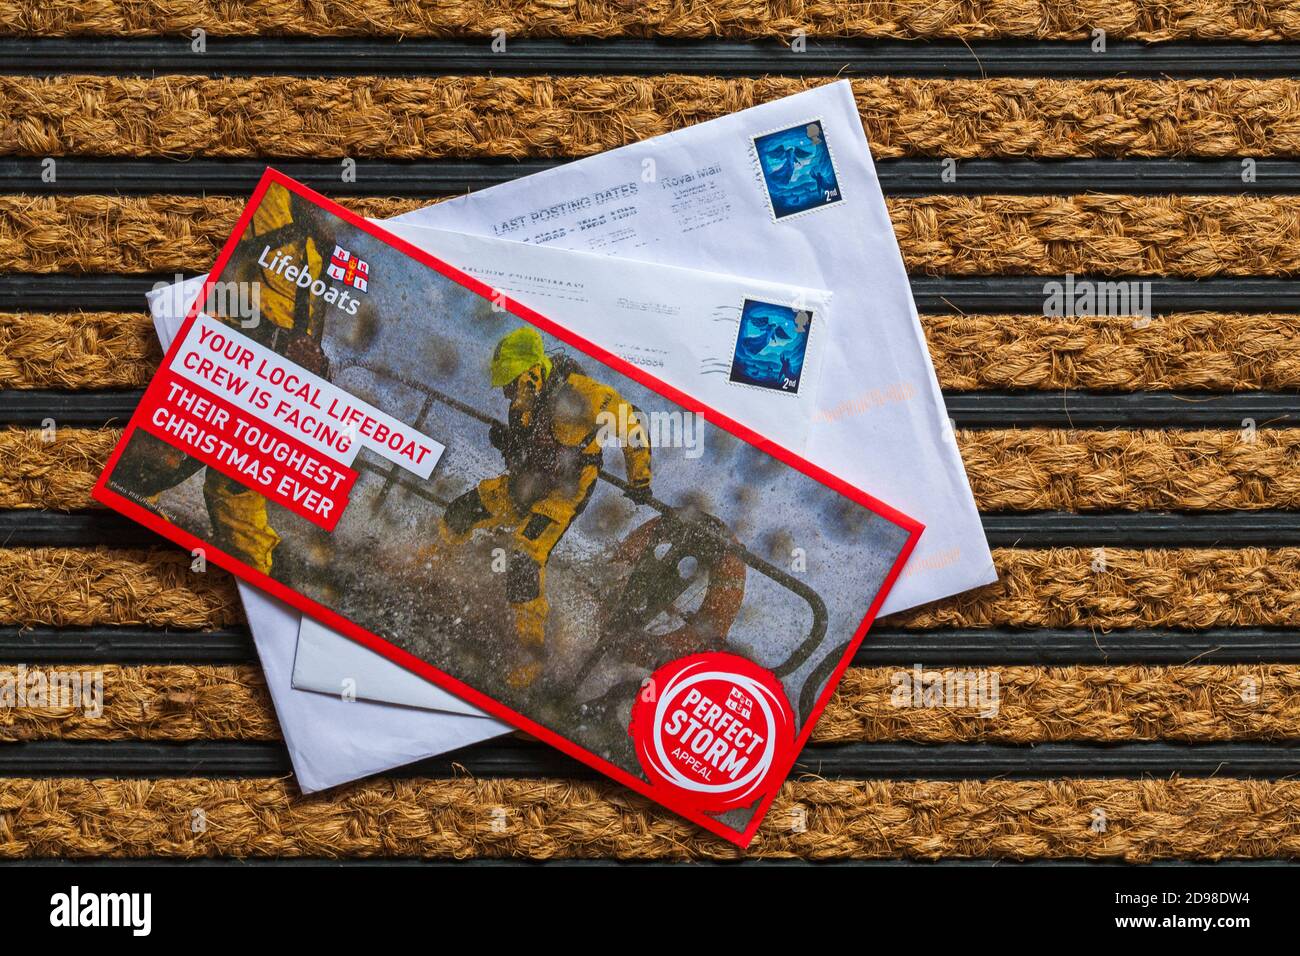 Post mail on doormat - charity appeal, RNLI Lifeboats perfect storm appeal your local lifeboat crew is facing their toughest Christmas ever Stock Photo